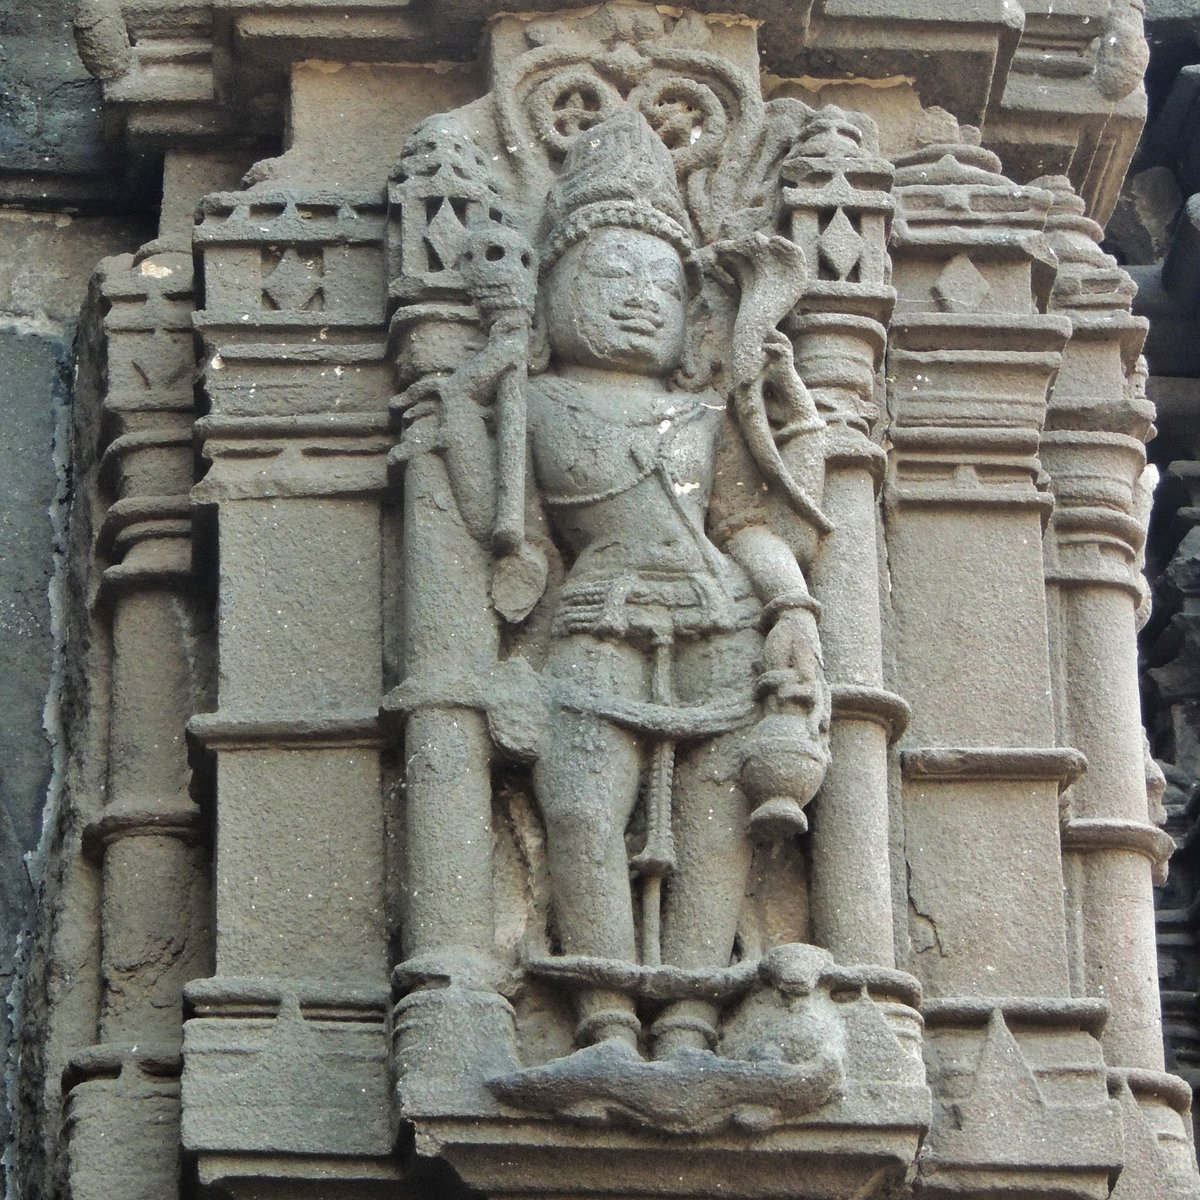 There are a few other depictions with small differences. Pic 4 Ishana from Ambernath Temple, near Mumbai. Instead of the Trishul, he holds a Khatvanga - a club with a skull on top  #AksharArt  #ArtByTheLetter